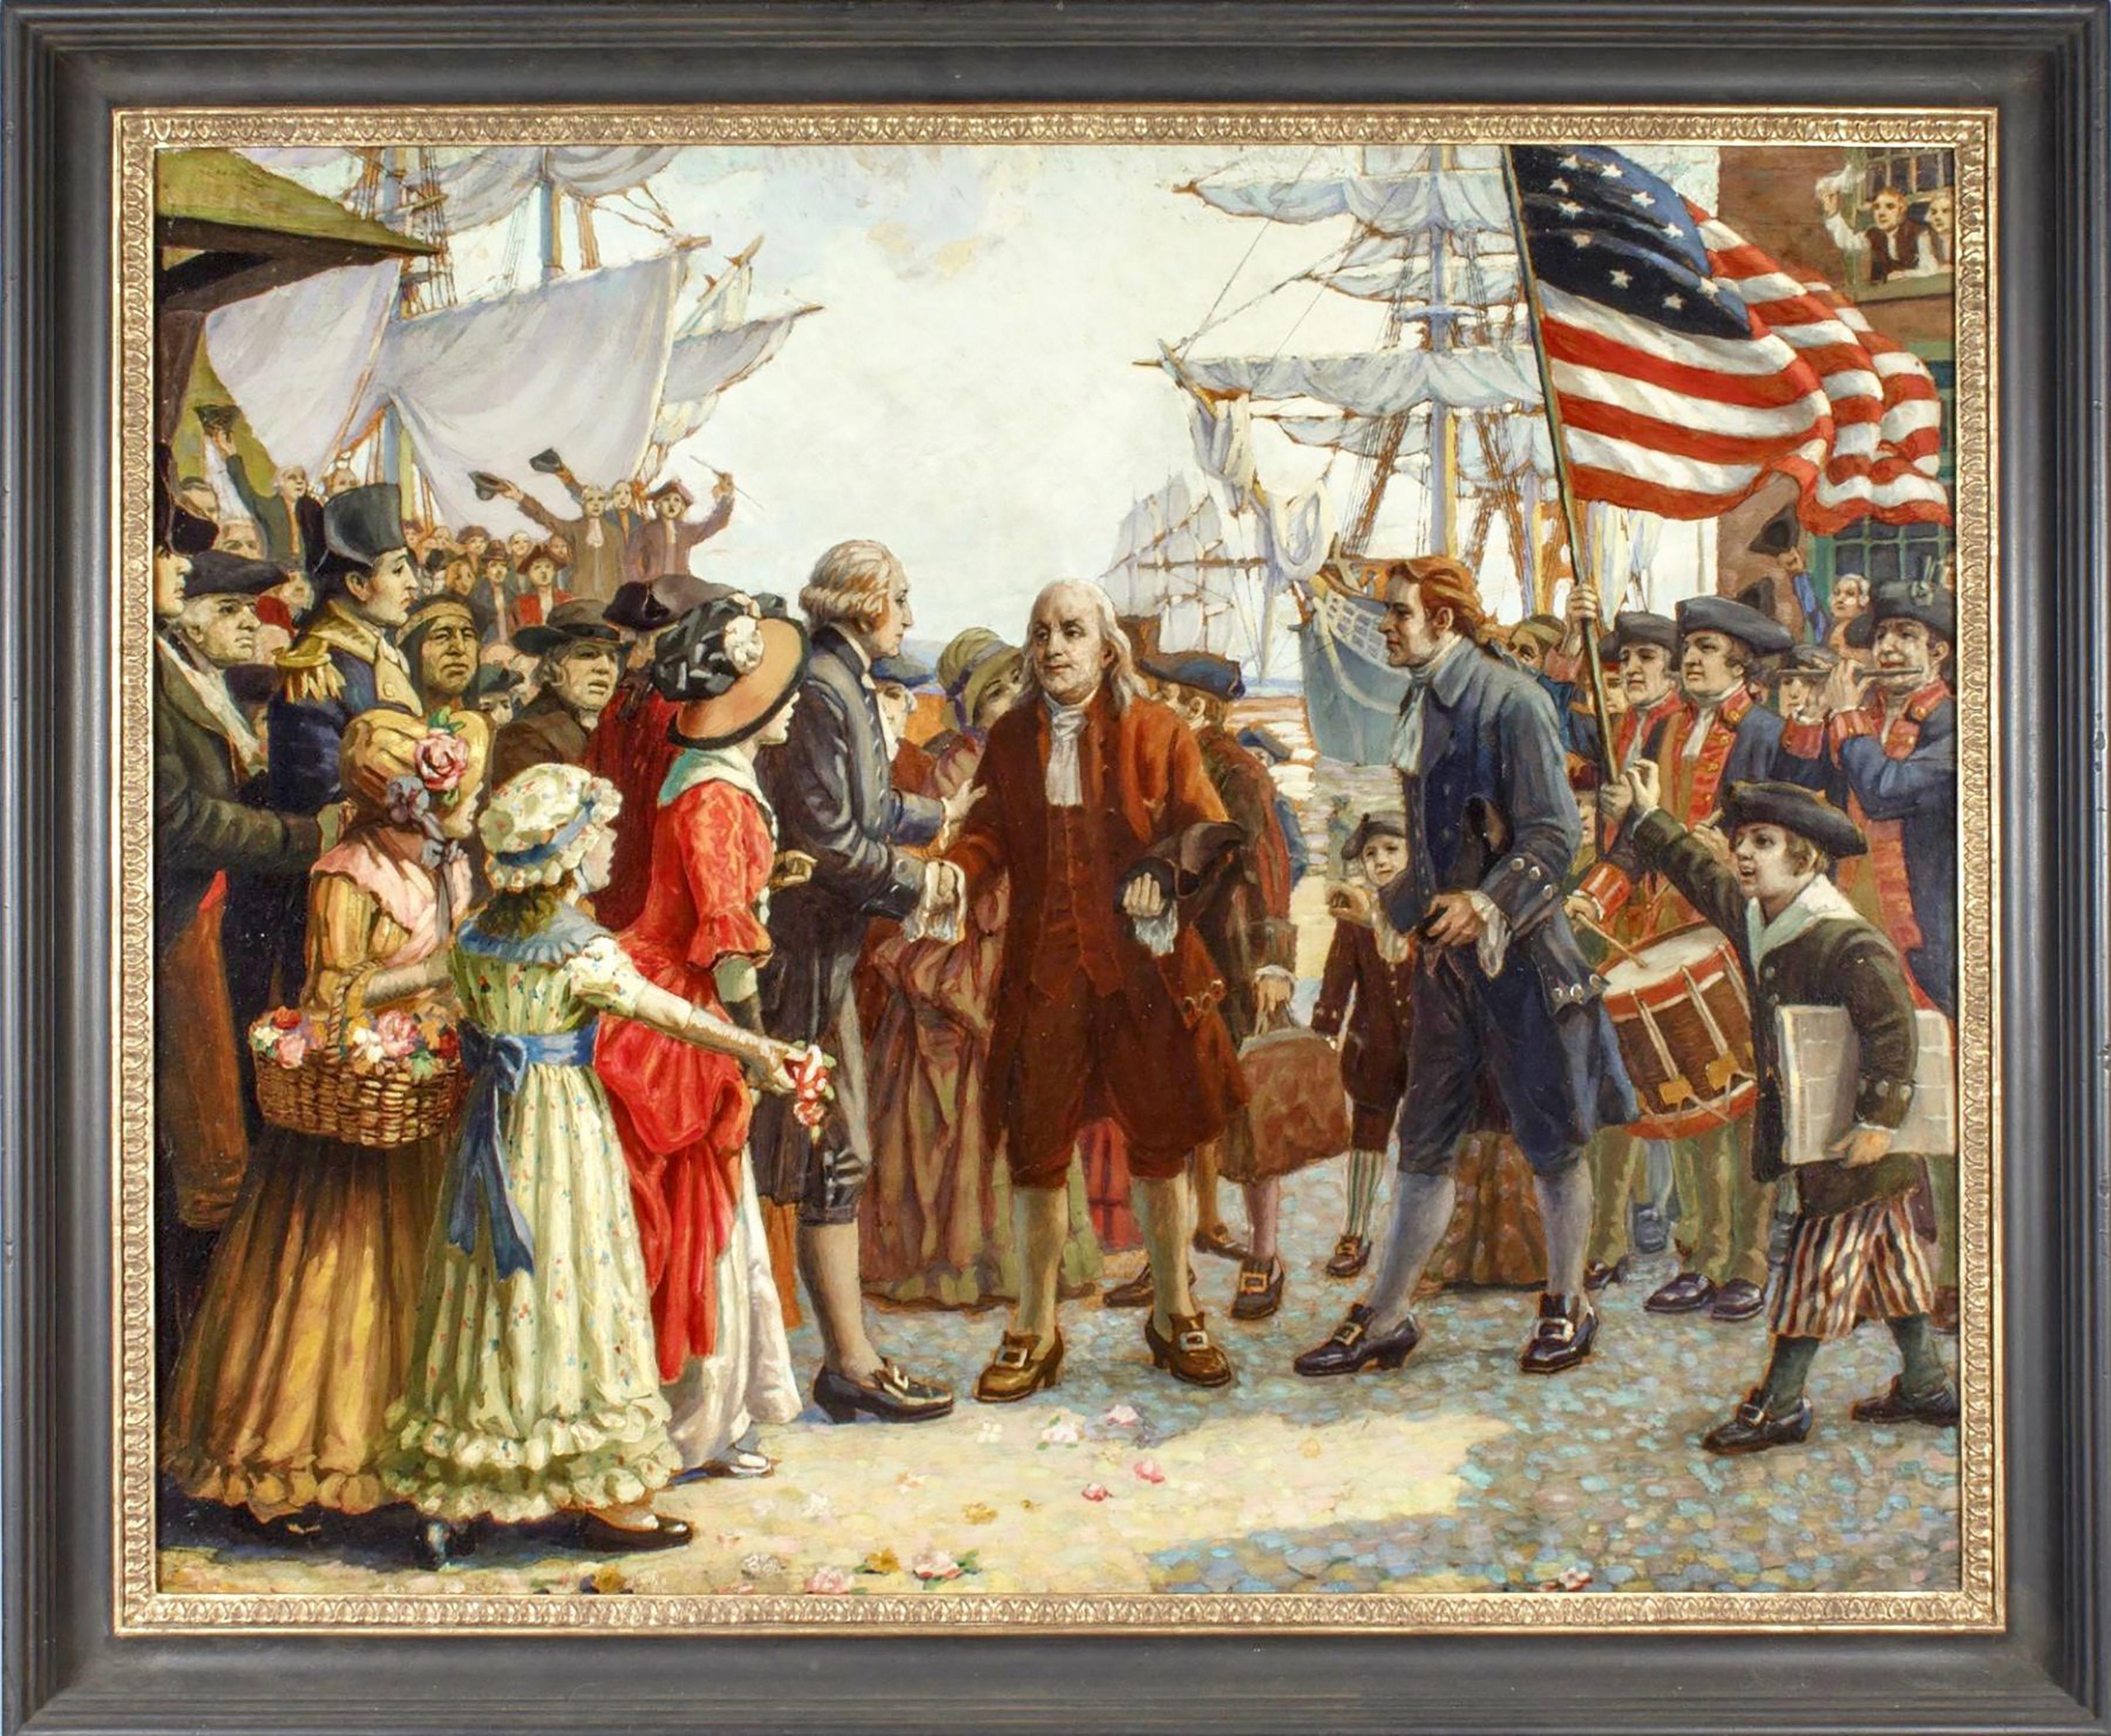 Franklin's Return to Philadelphia in 1785 - Painting by Unknown